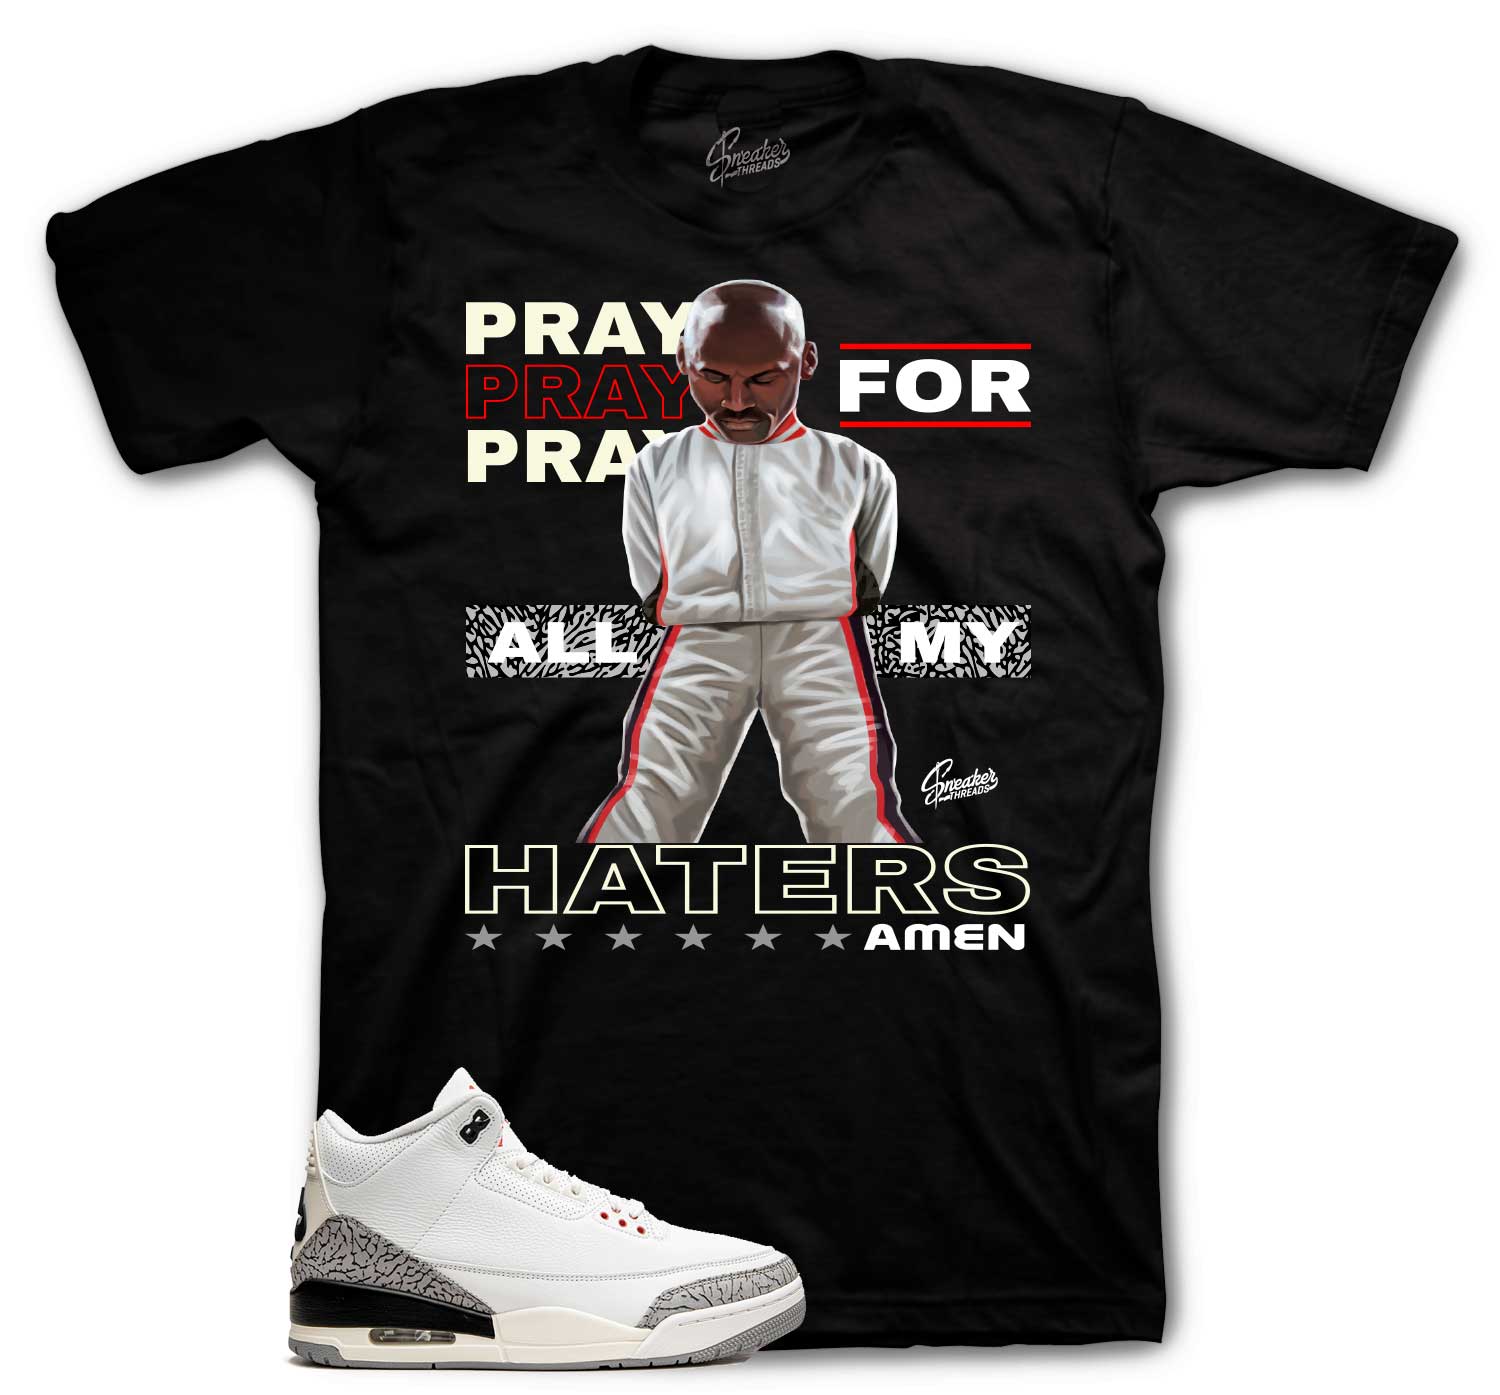 Retro 3 White Cement Reimagined Shirt - Pray For Haters - Black